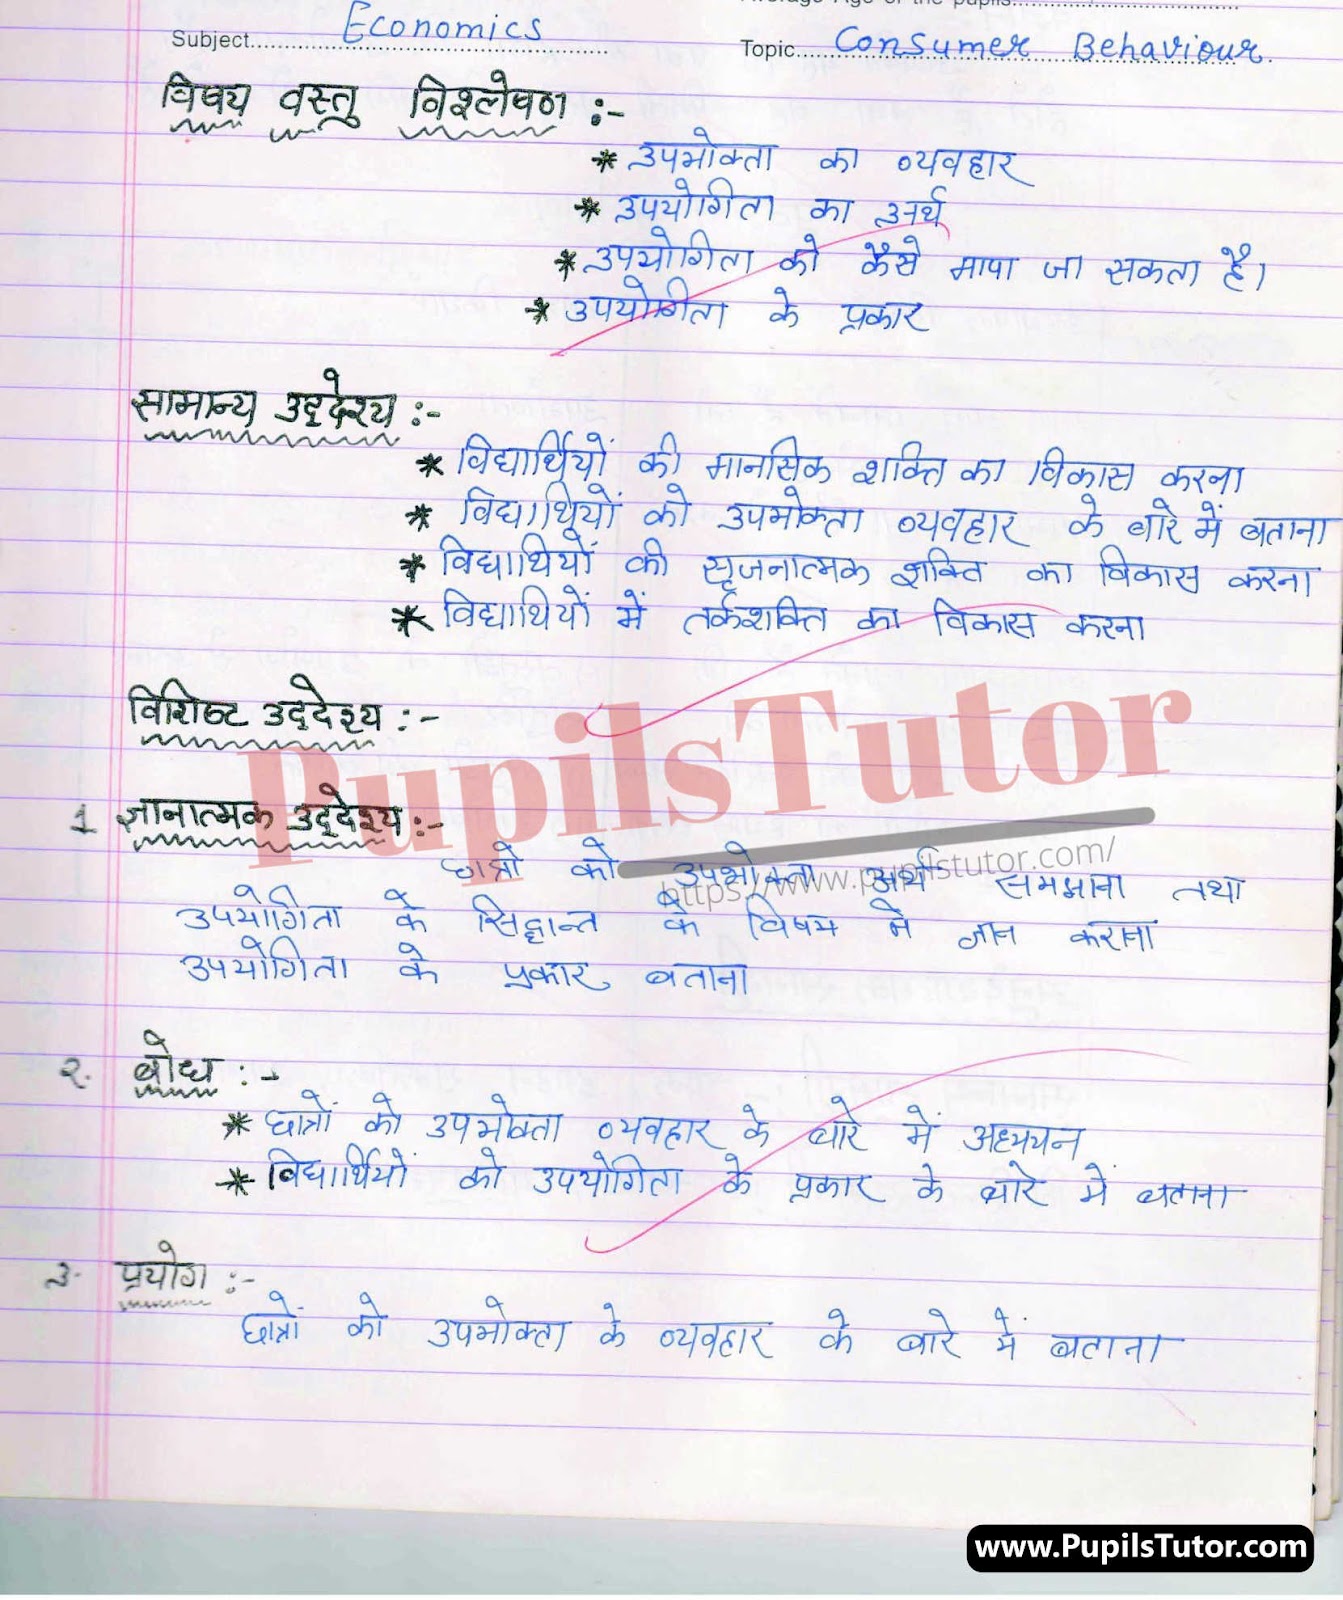 Upbhokta Ka Vyavhar Lesson Plan | Consumer Behaviour Lesson Plan In Hindi For Class 11, 12 – (Page And Image Number 1) – Pupils Tutor